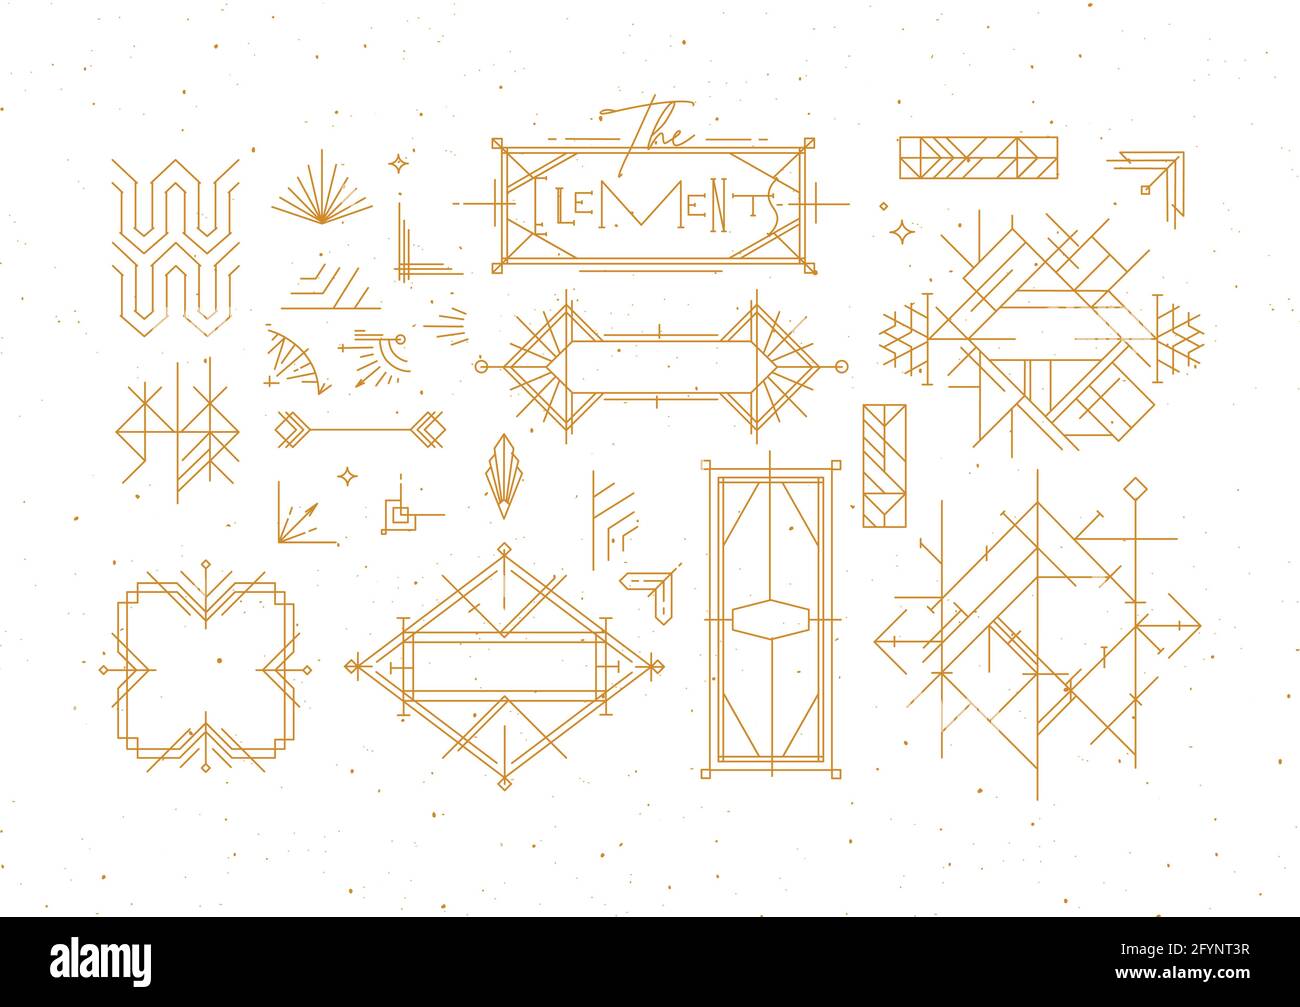 Art deco vintage design elements drawing in gold line style on white background Stock Vector